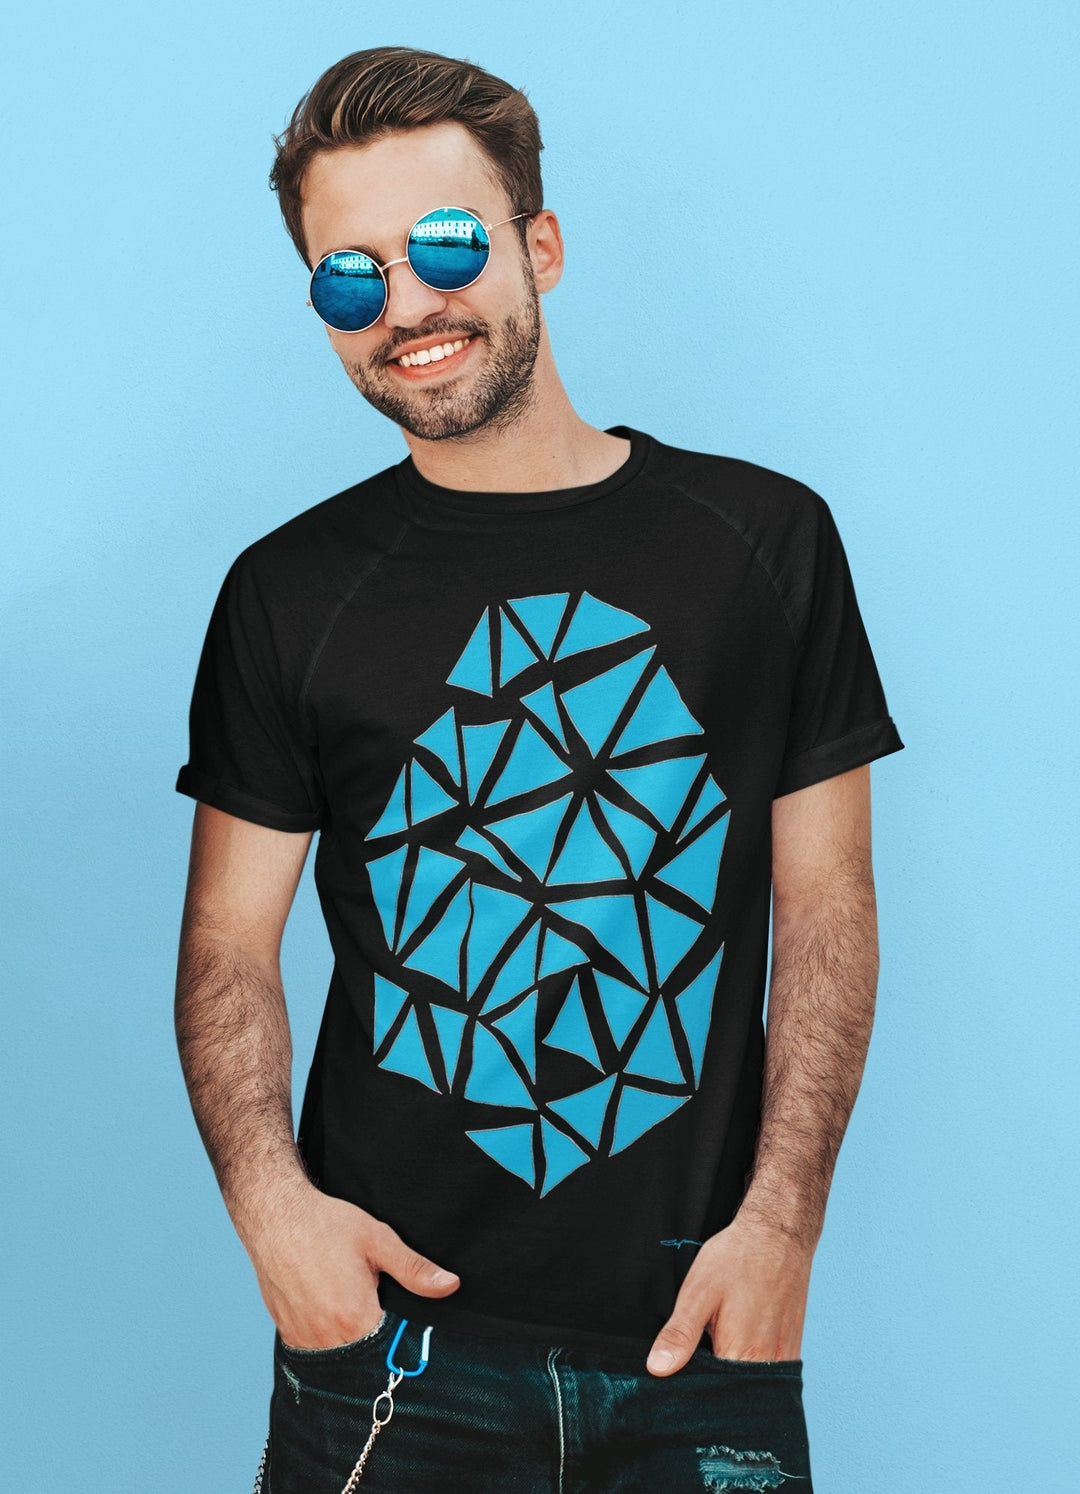 Abstract T-Shirt - Colorful Abstract T-Shirt, Nest Floating in Color. Stand Out In Style With A Unique Colorful Design at Miami Abstract Inc.